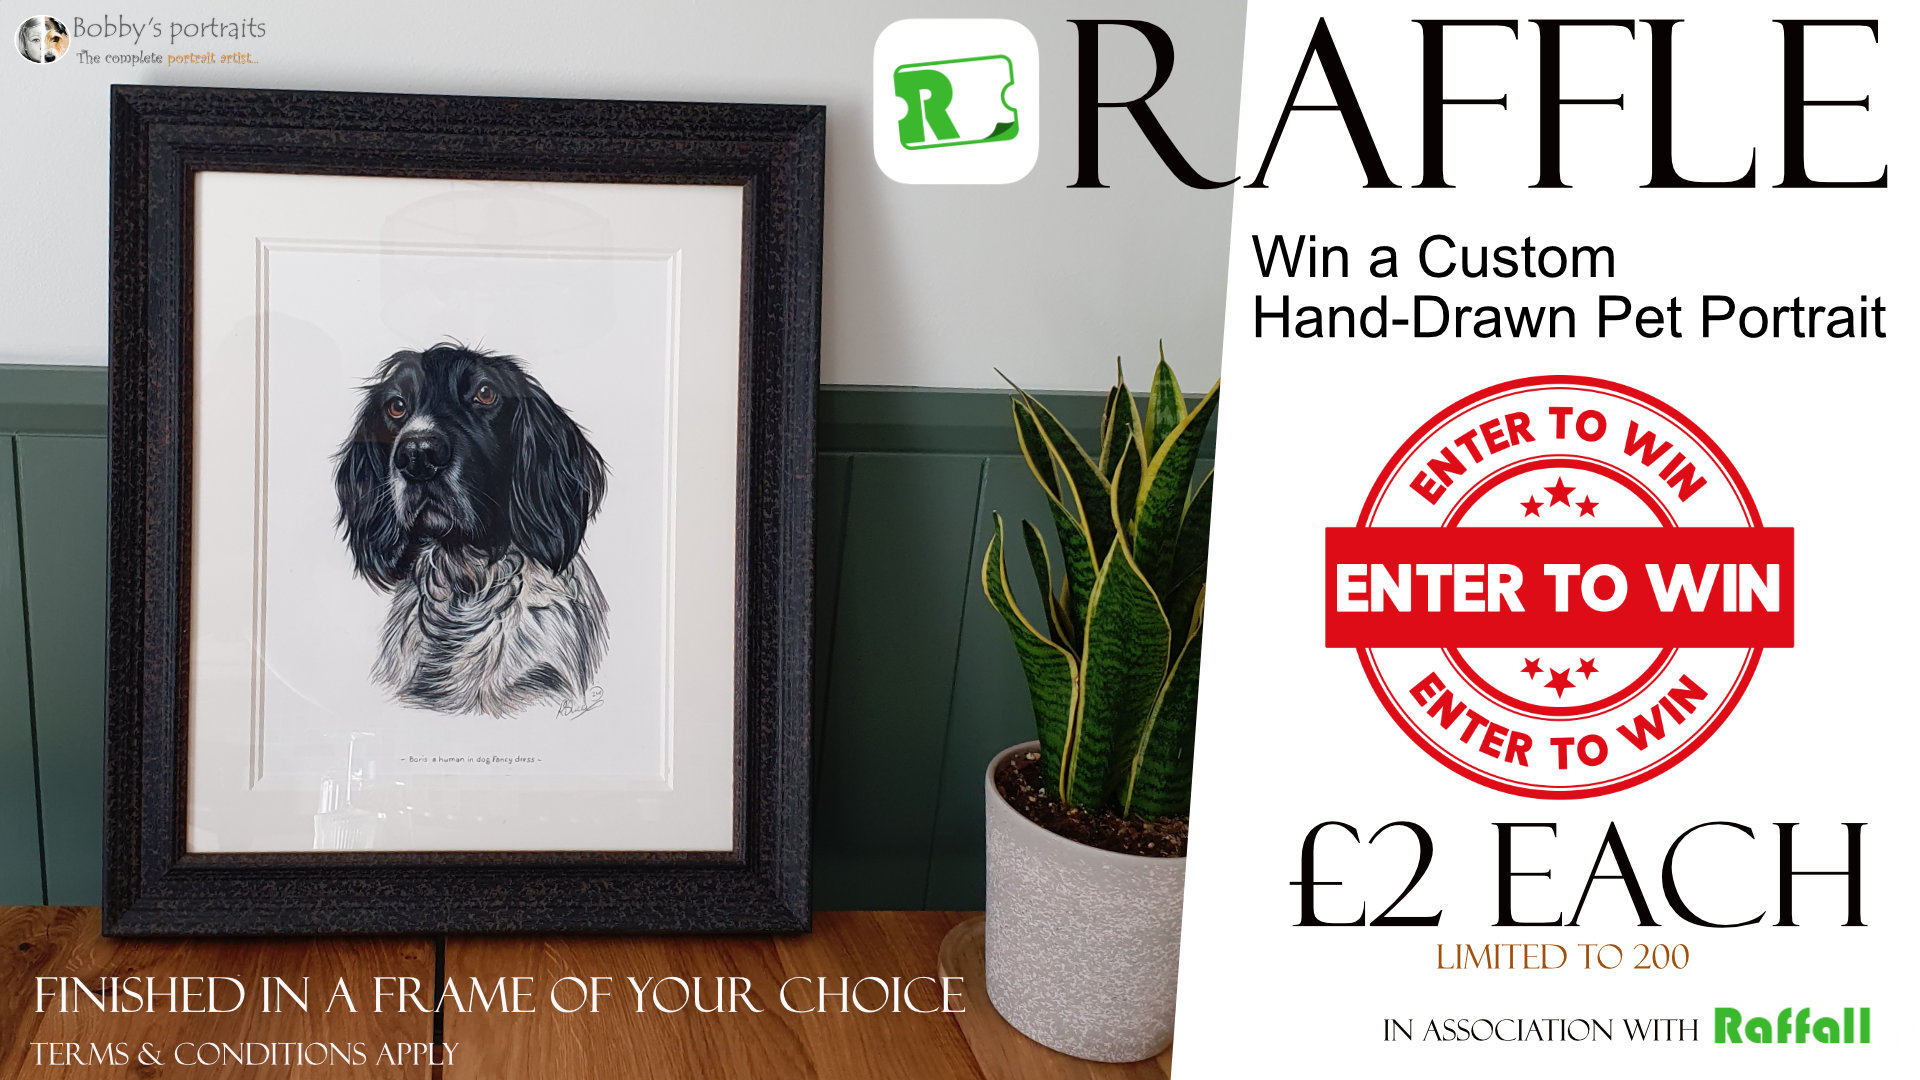 Featured image for “Win a Custom Hand-Drawn Pet Portrait Competition! £2 per ticket, limited to 200.”